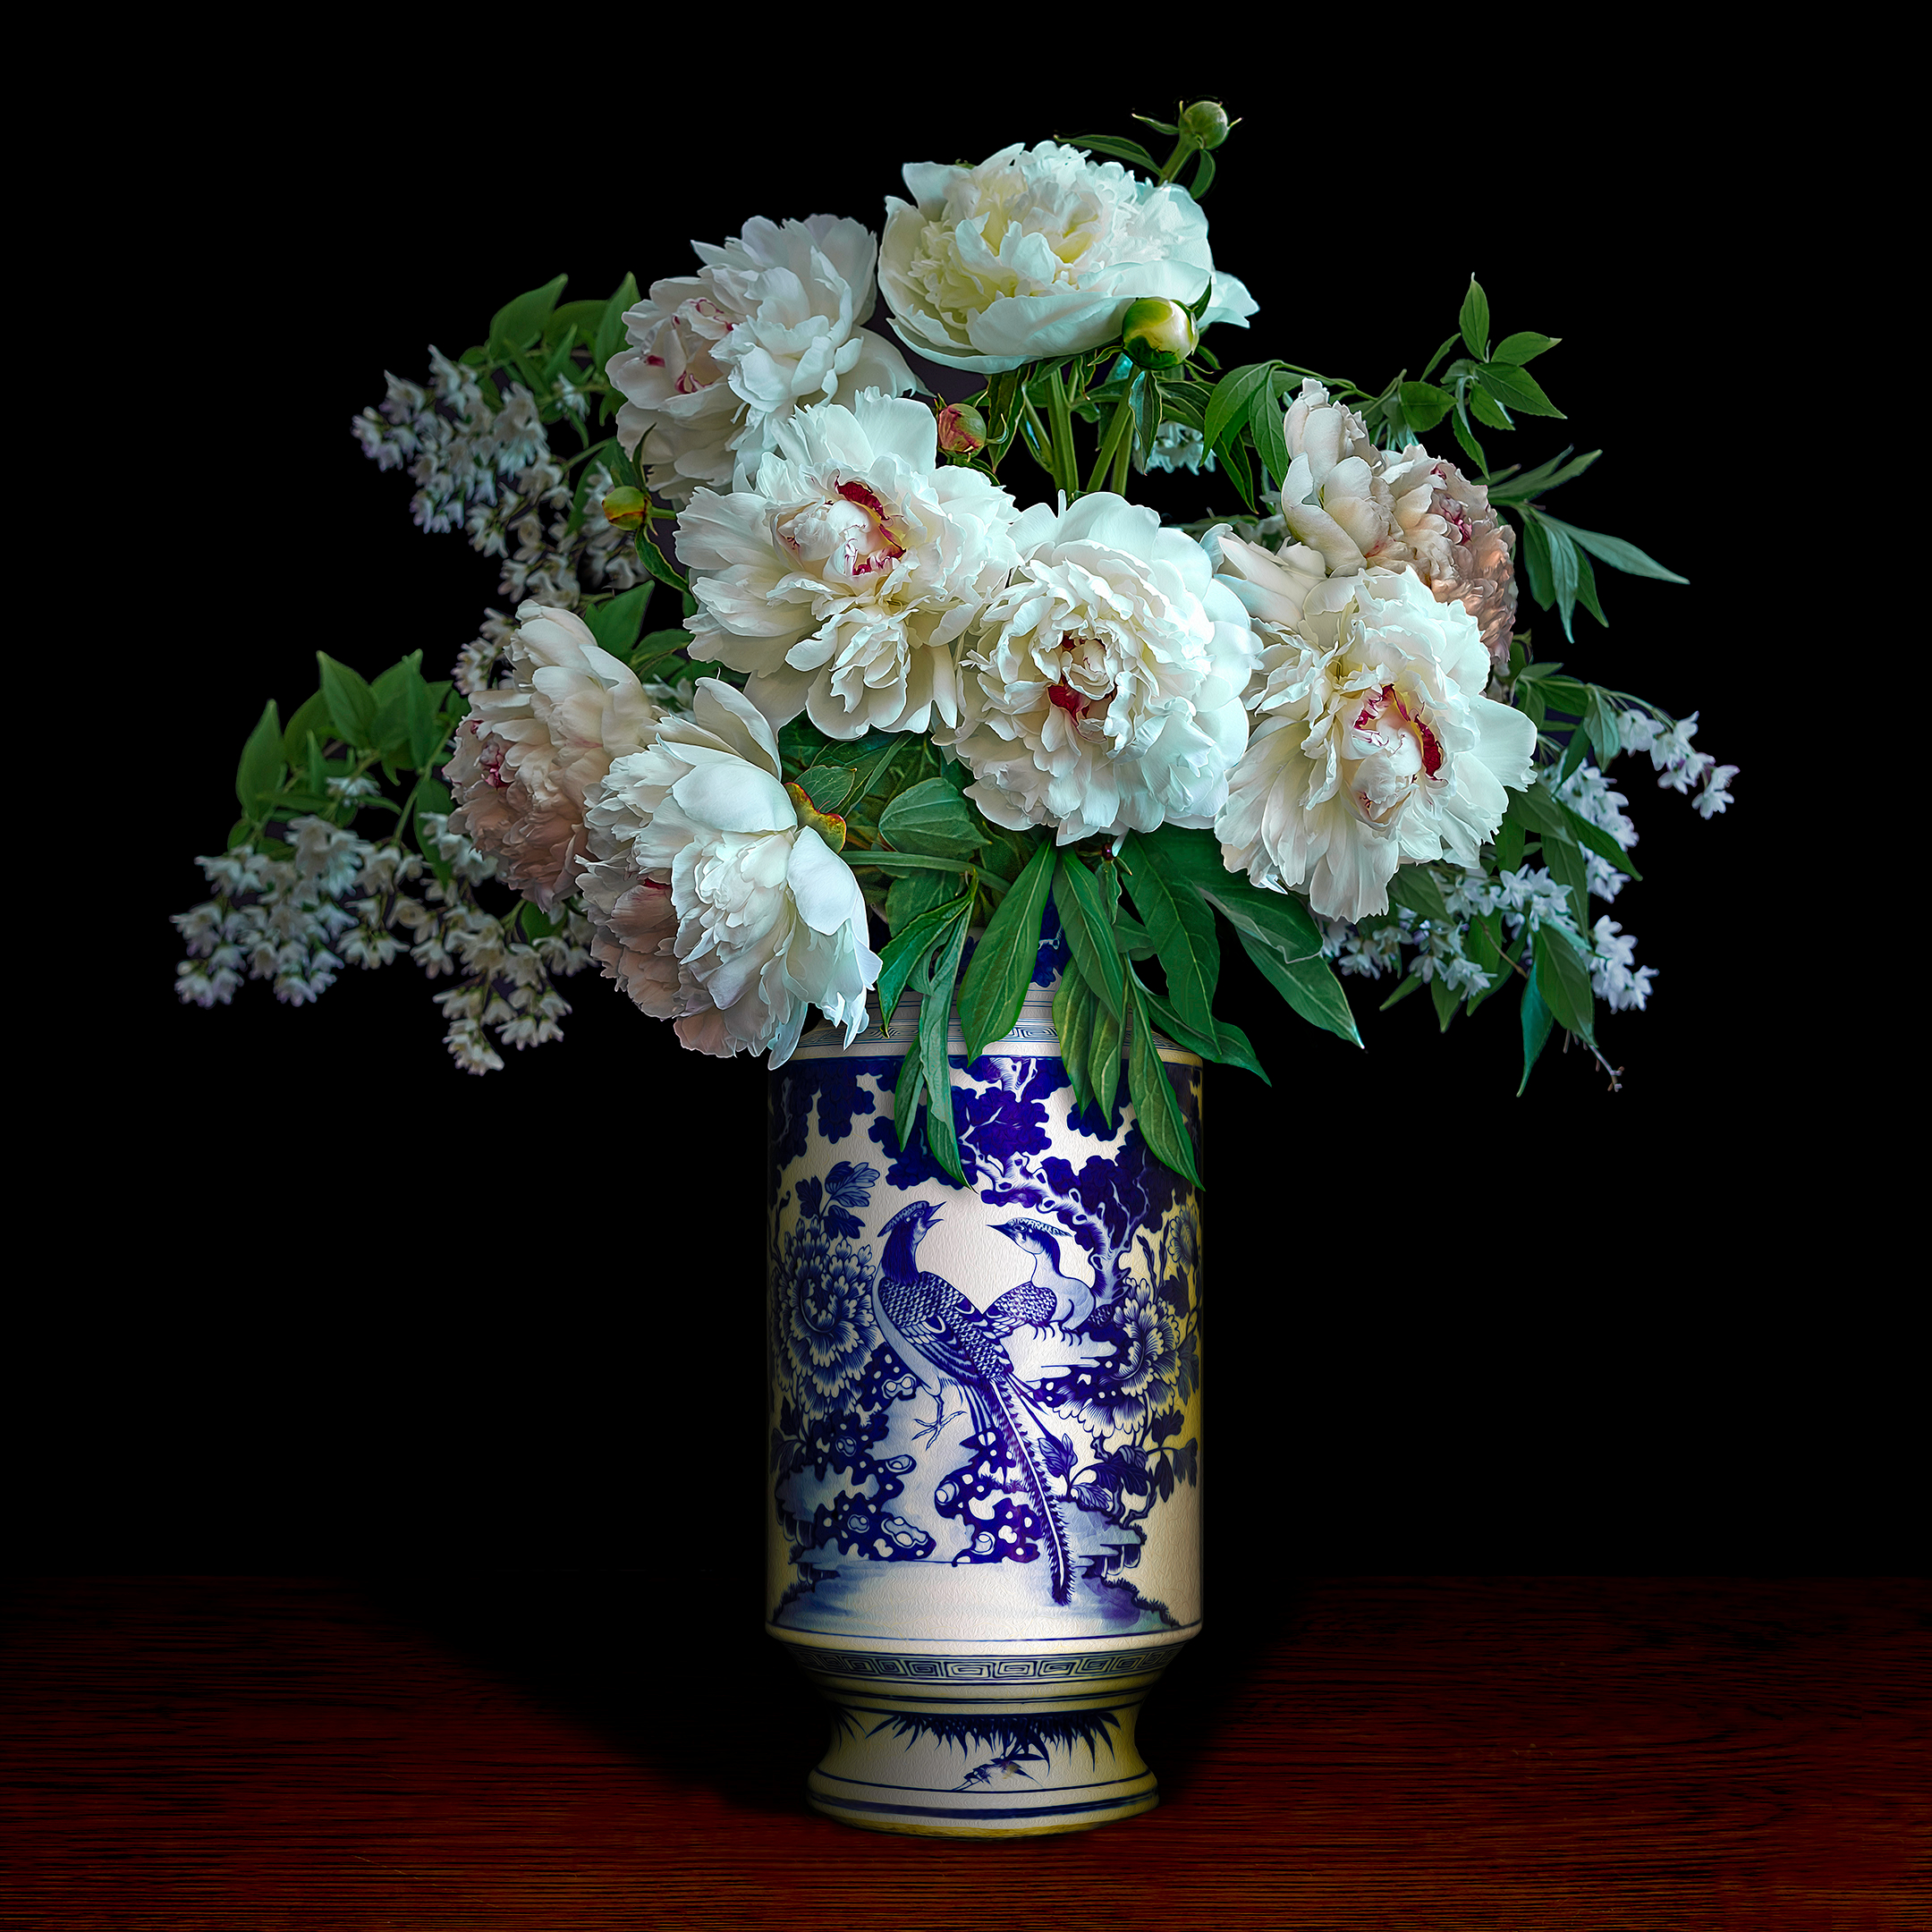     T.M. Glass, Peonies in a Blue and White Chinese Peacock Vase &#8211; Tyler McDermott, 2021

